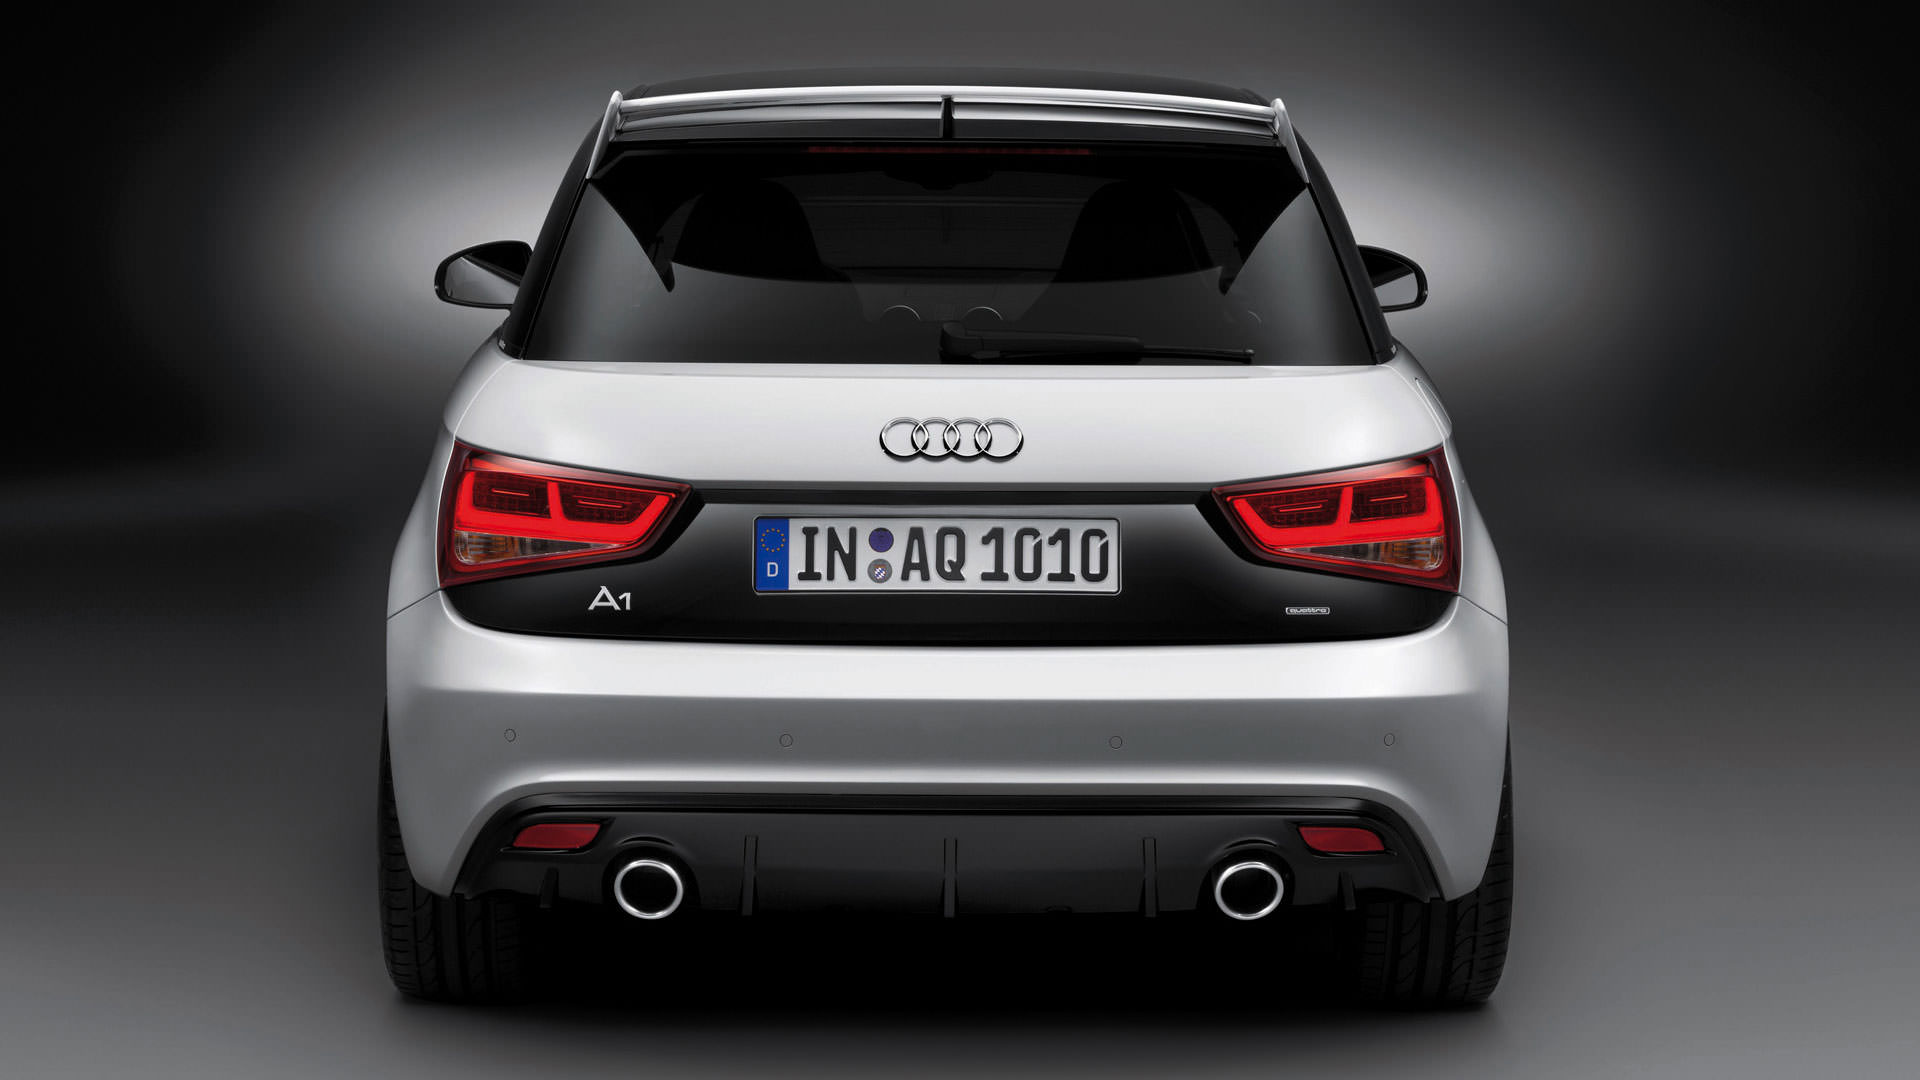 Audi A1 Wallpapers for Computer Desktop, Android, IOS, Iphone ...